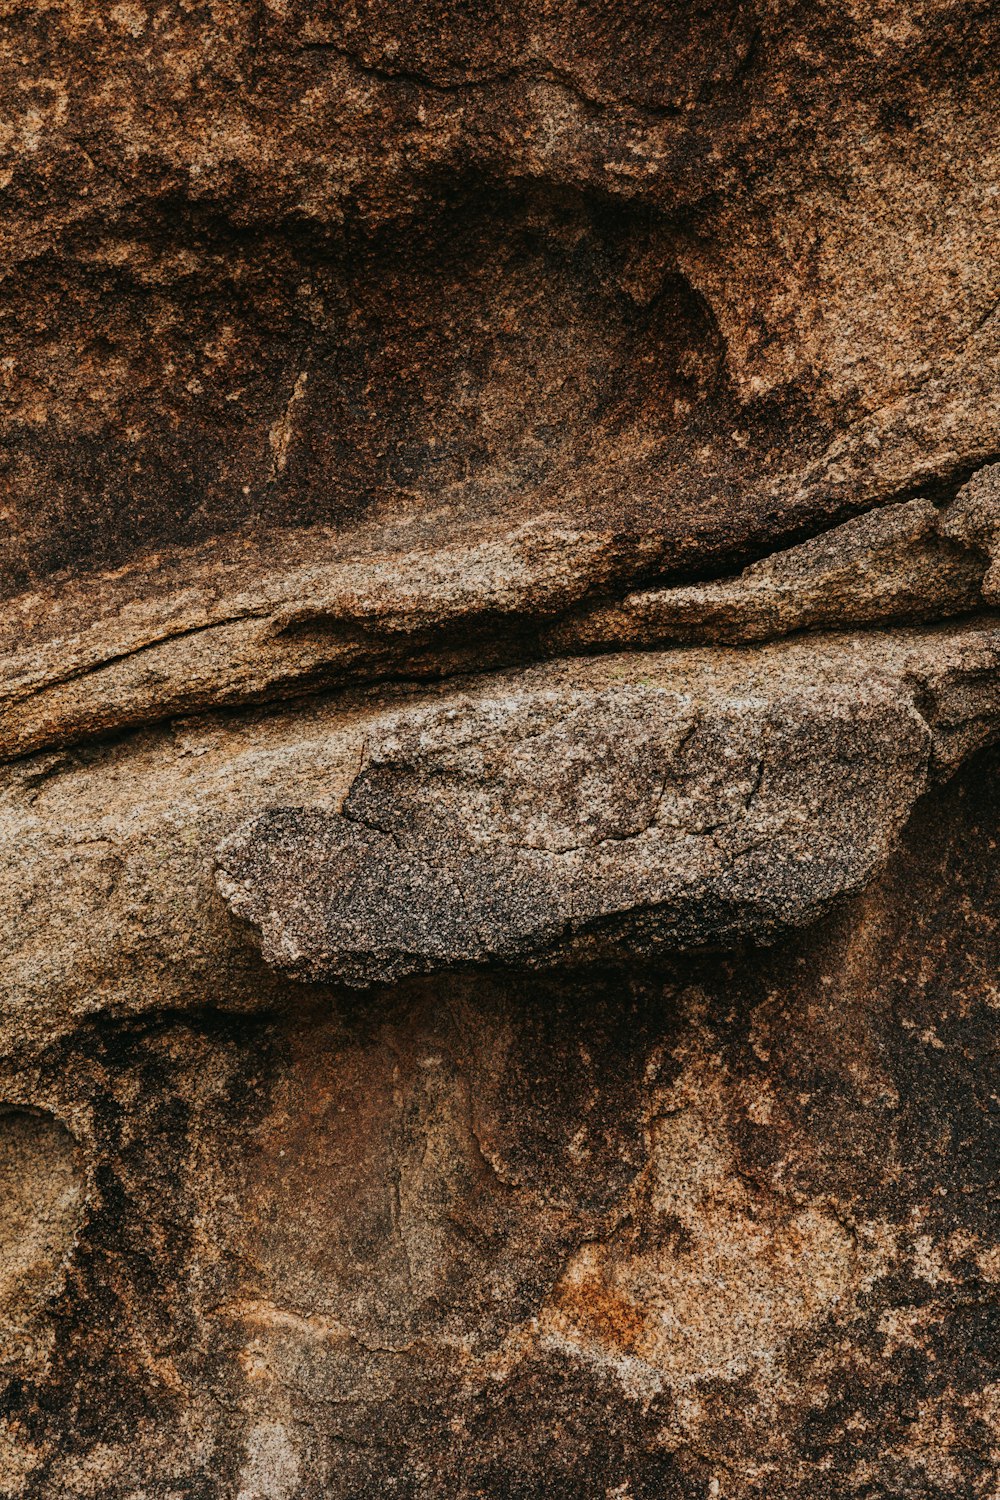 brown and gray rock formation